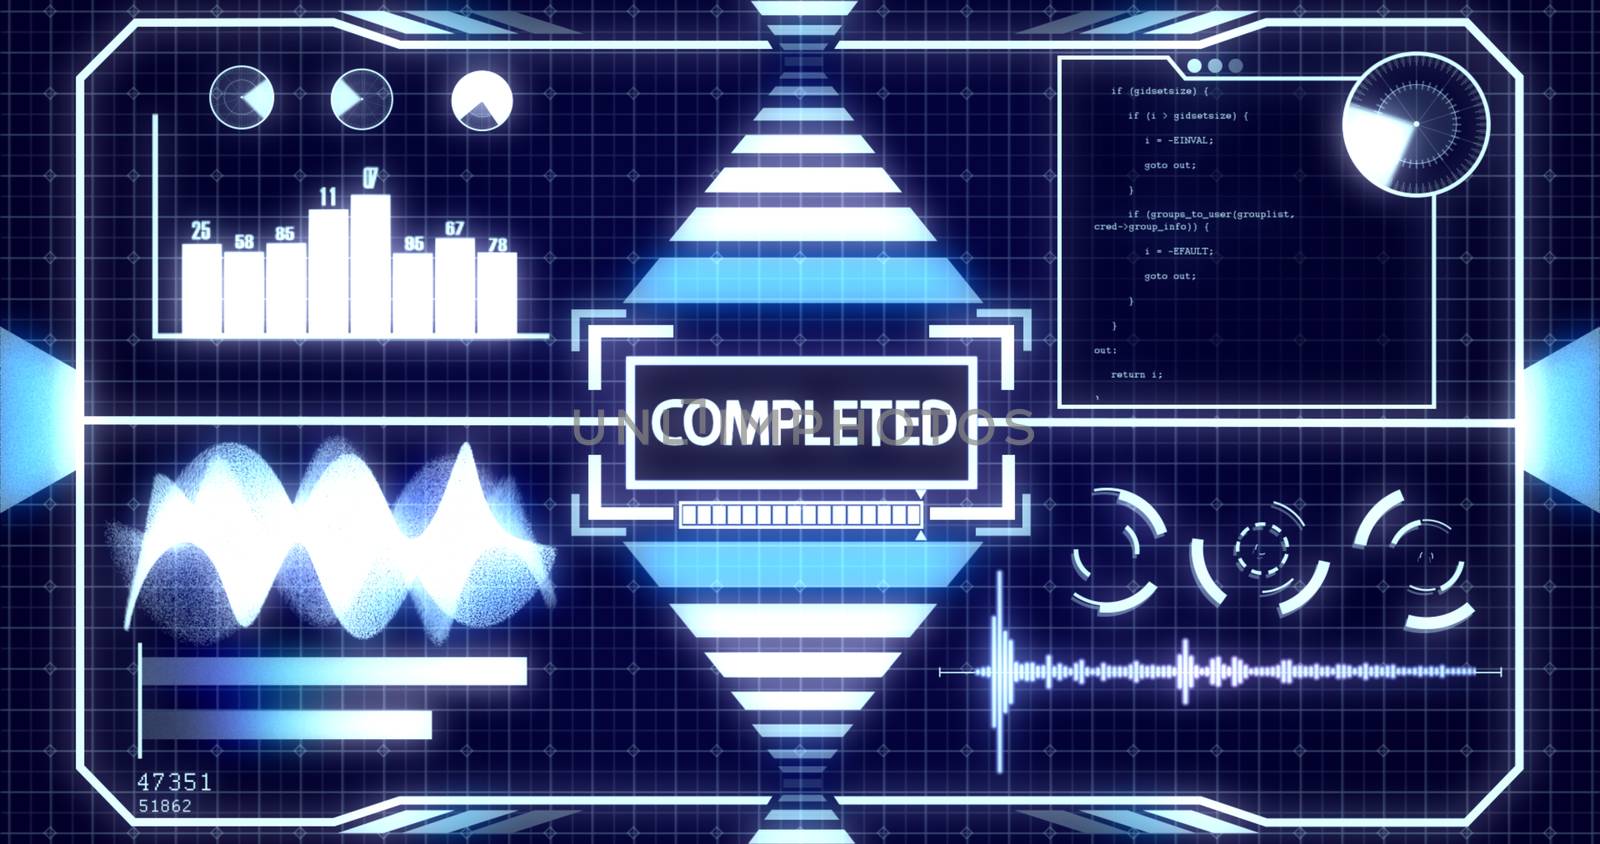 Completed Screen with Process Bar and Digital objects including Soundwave, Graph, Chart, Circles, Radar, Hacker typing and Glowing light bars Ver.1 (Full screen) by ariya23156